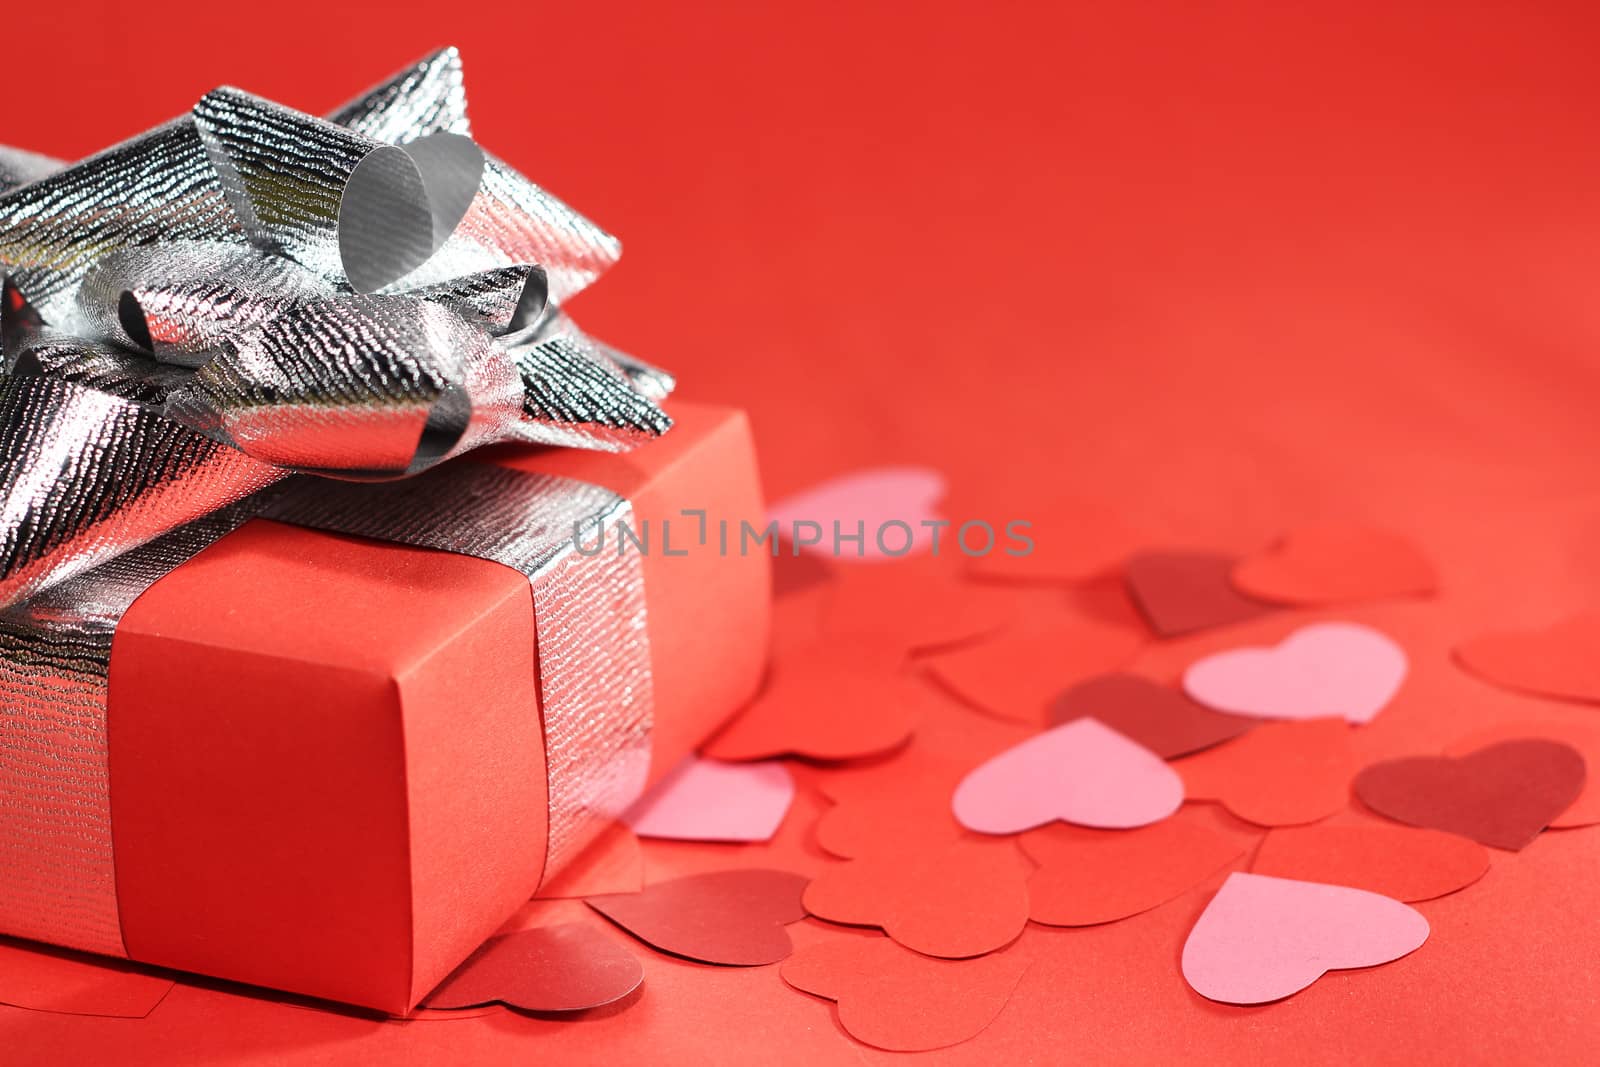 Valentines Day gift in box and small hearts on red background